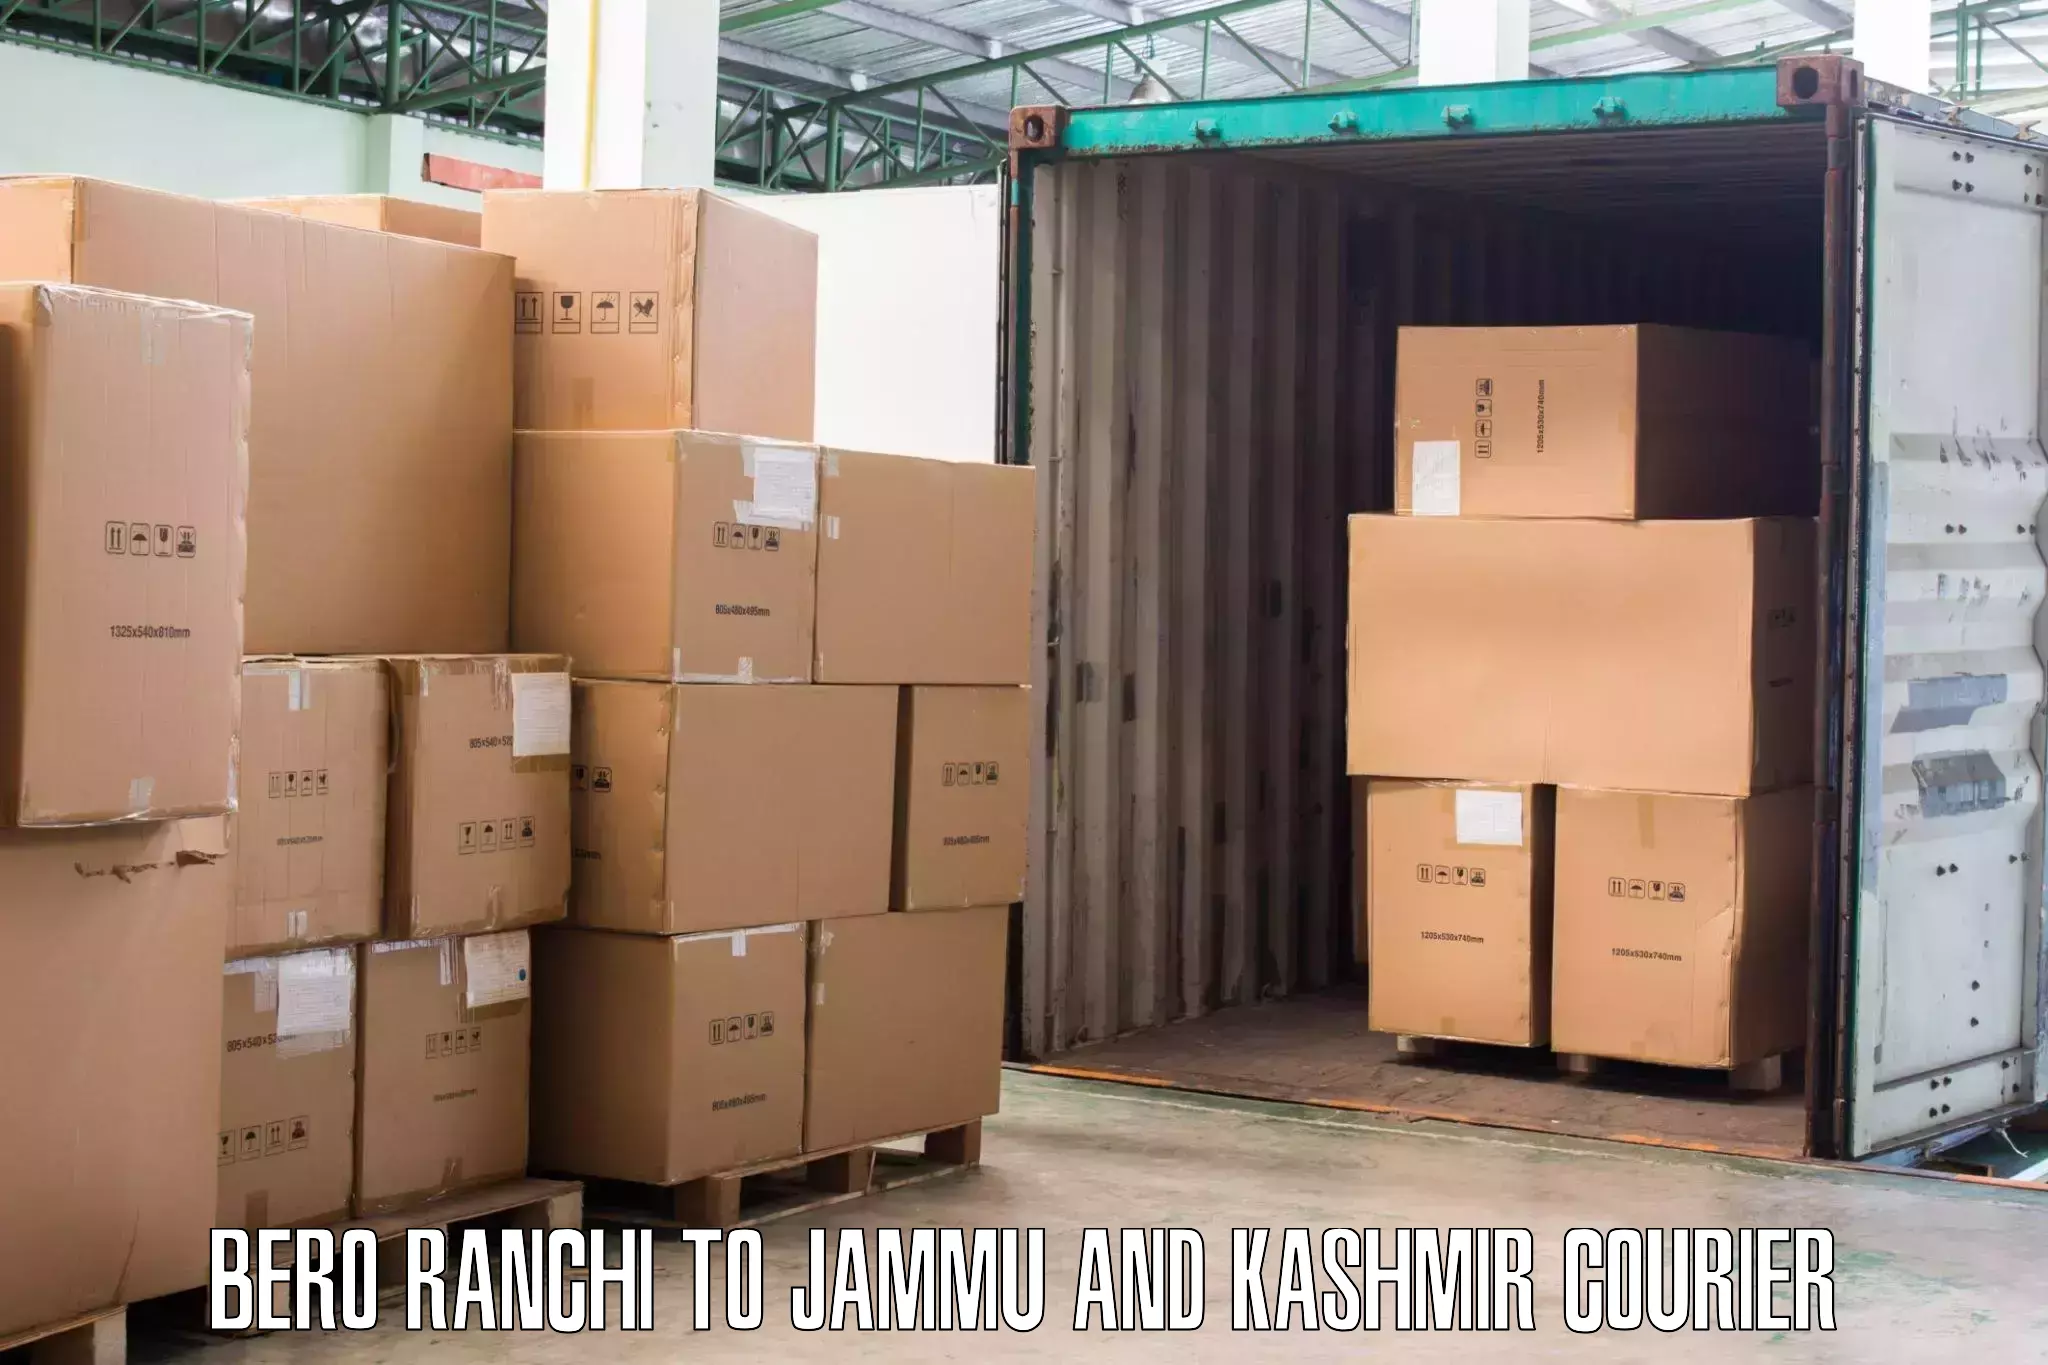 Moving and packing experts Bero Ranchi to Jammu